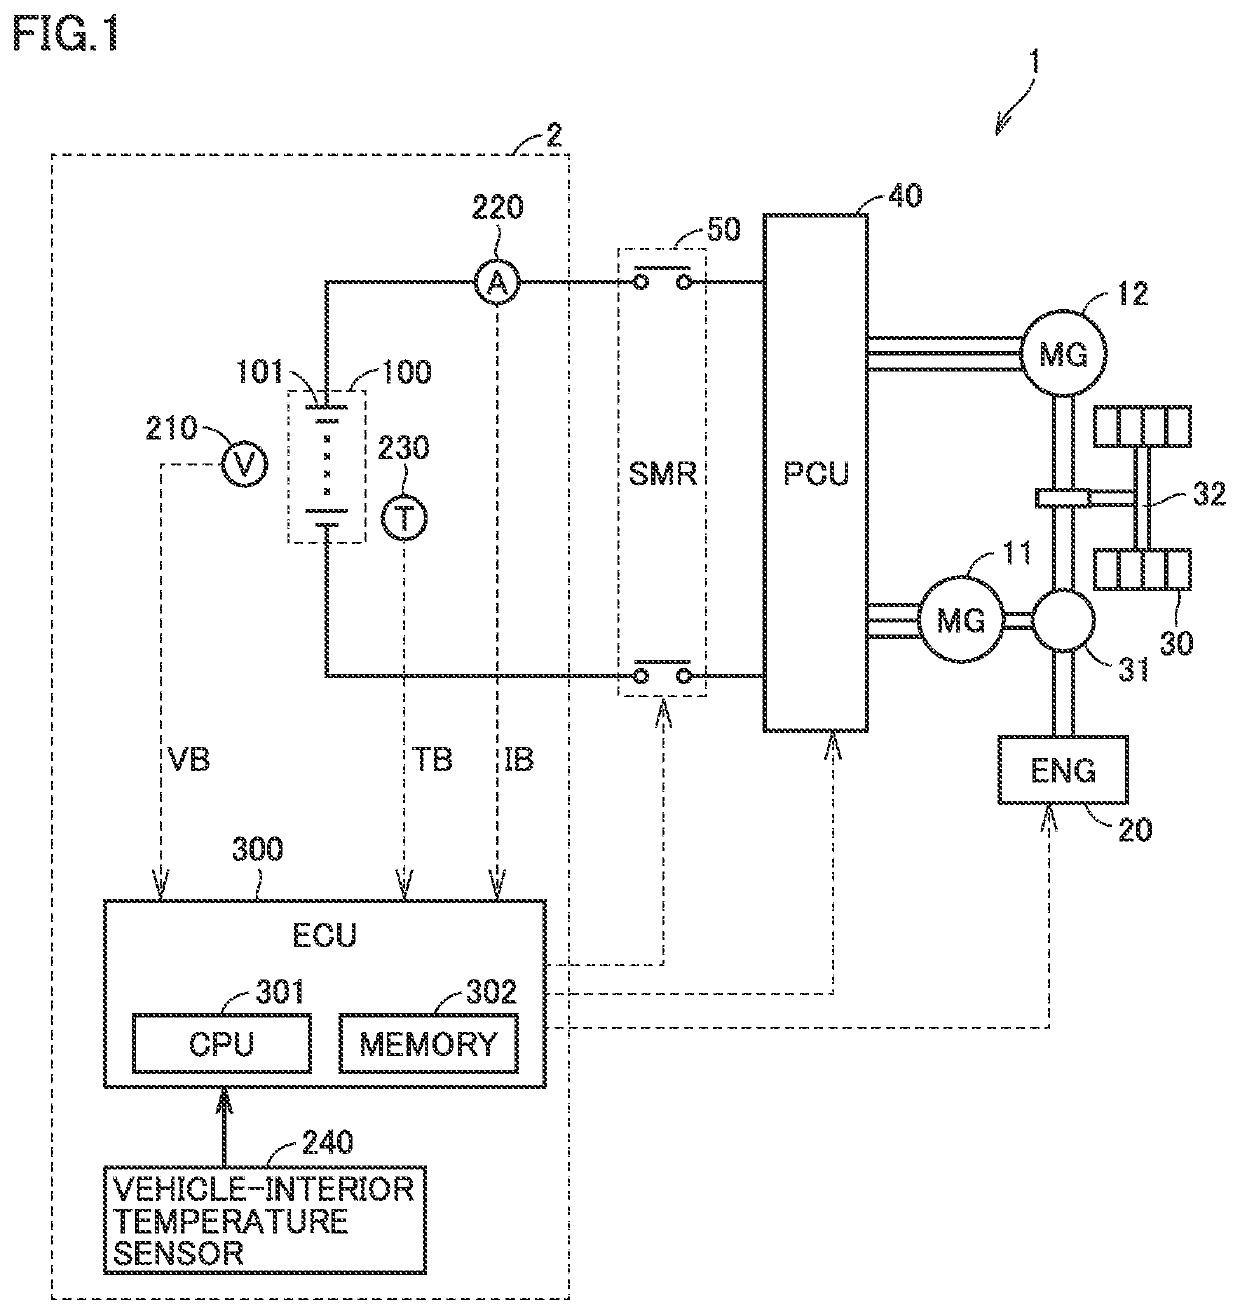 Lithium-ion second battery controller for reducing charging loss while preventing deterioration from lithium deposition